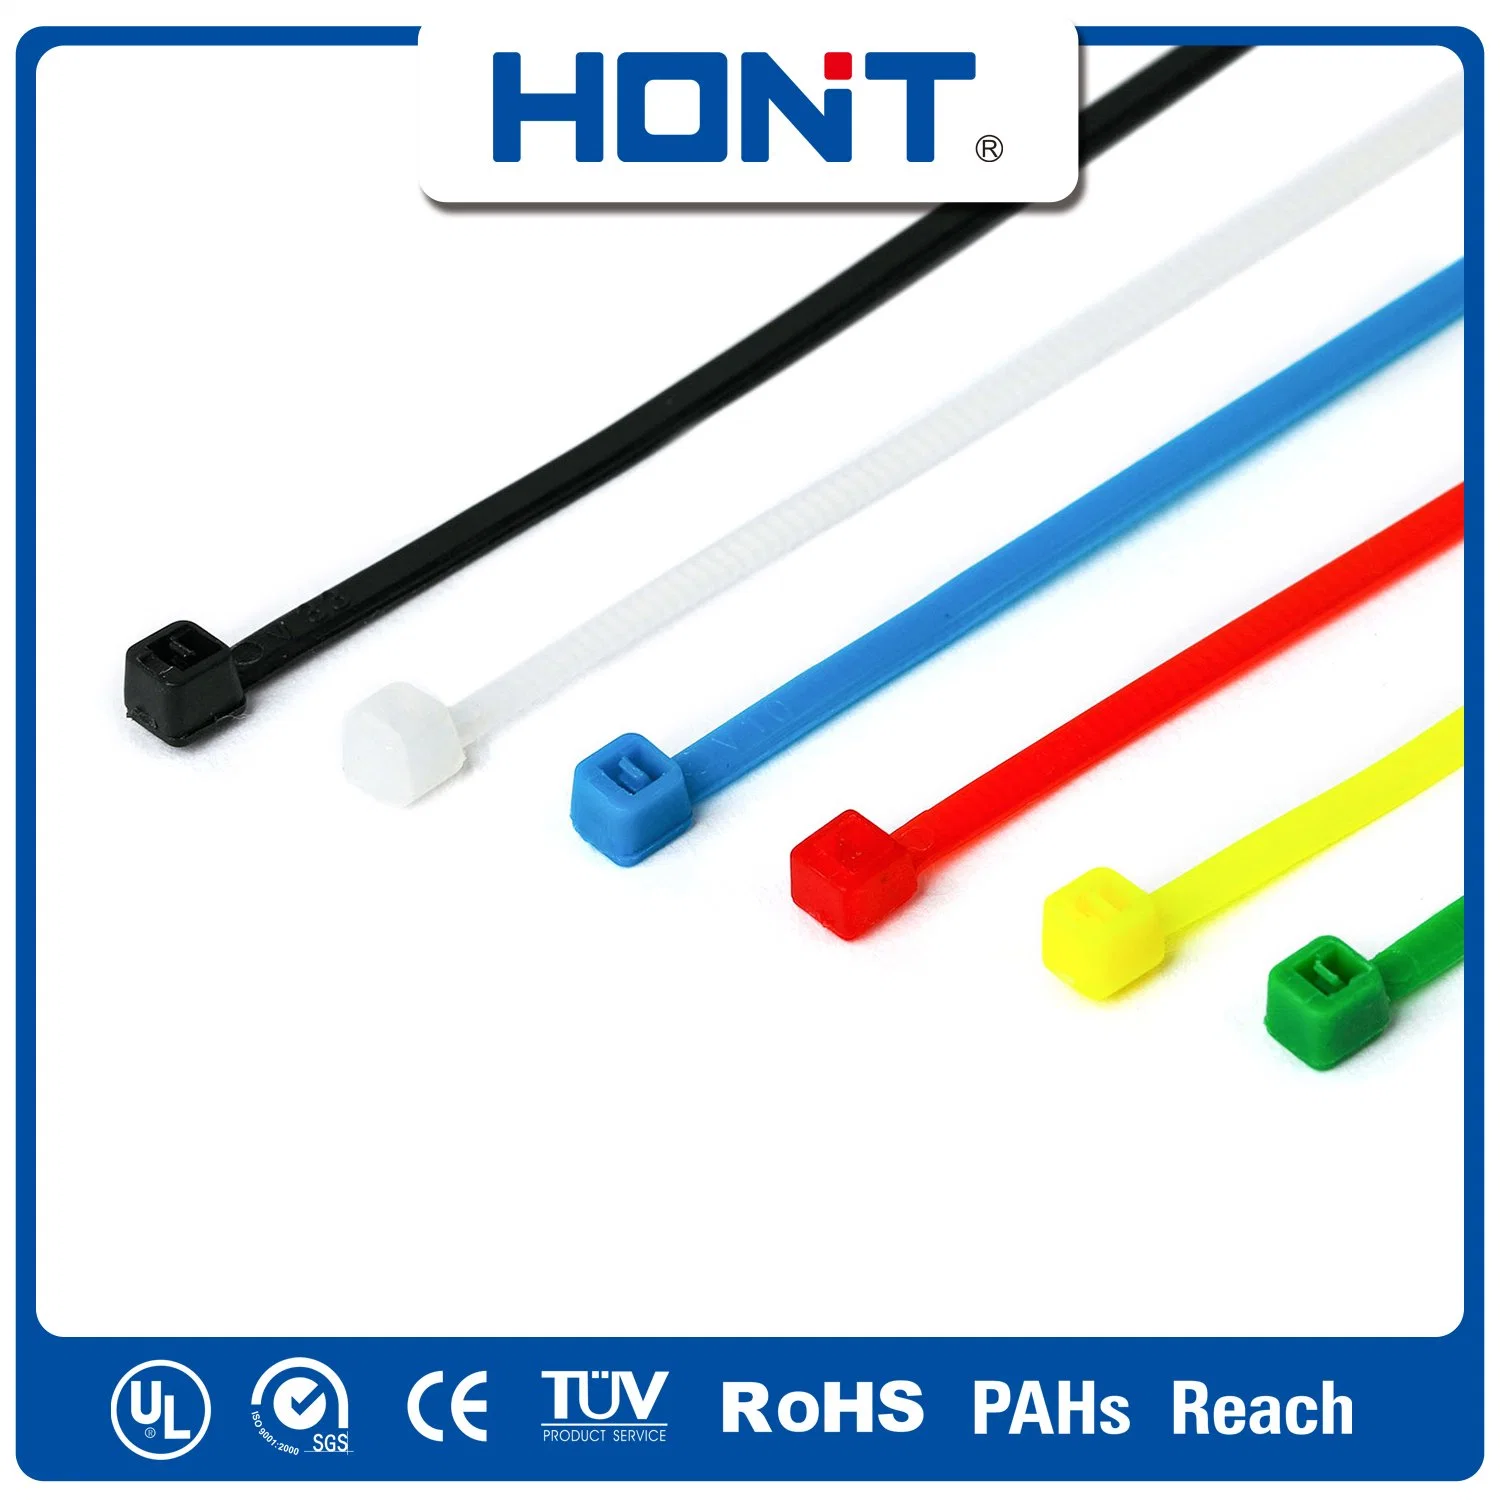 Top Quality Hont UL Plastic Bag + Sticker Exporting Carton/Tray Nylon Tie Cable Accessories